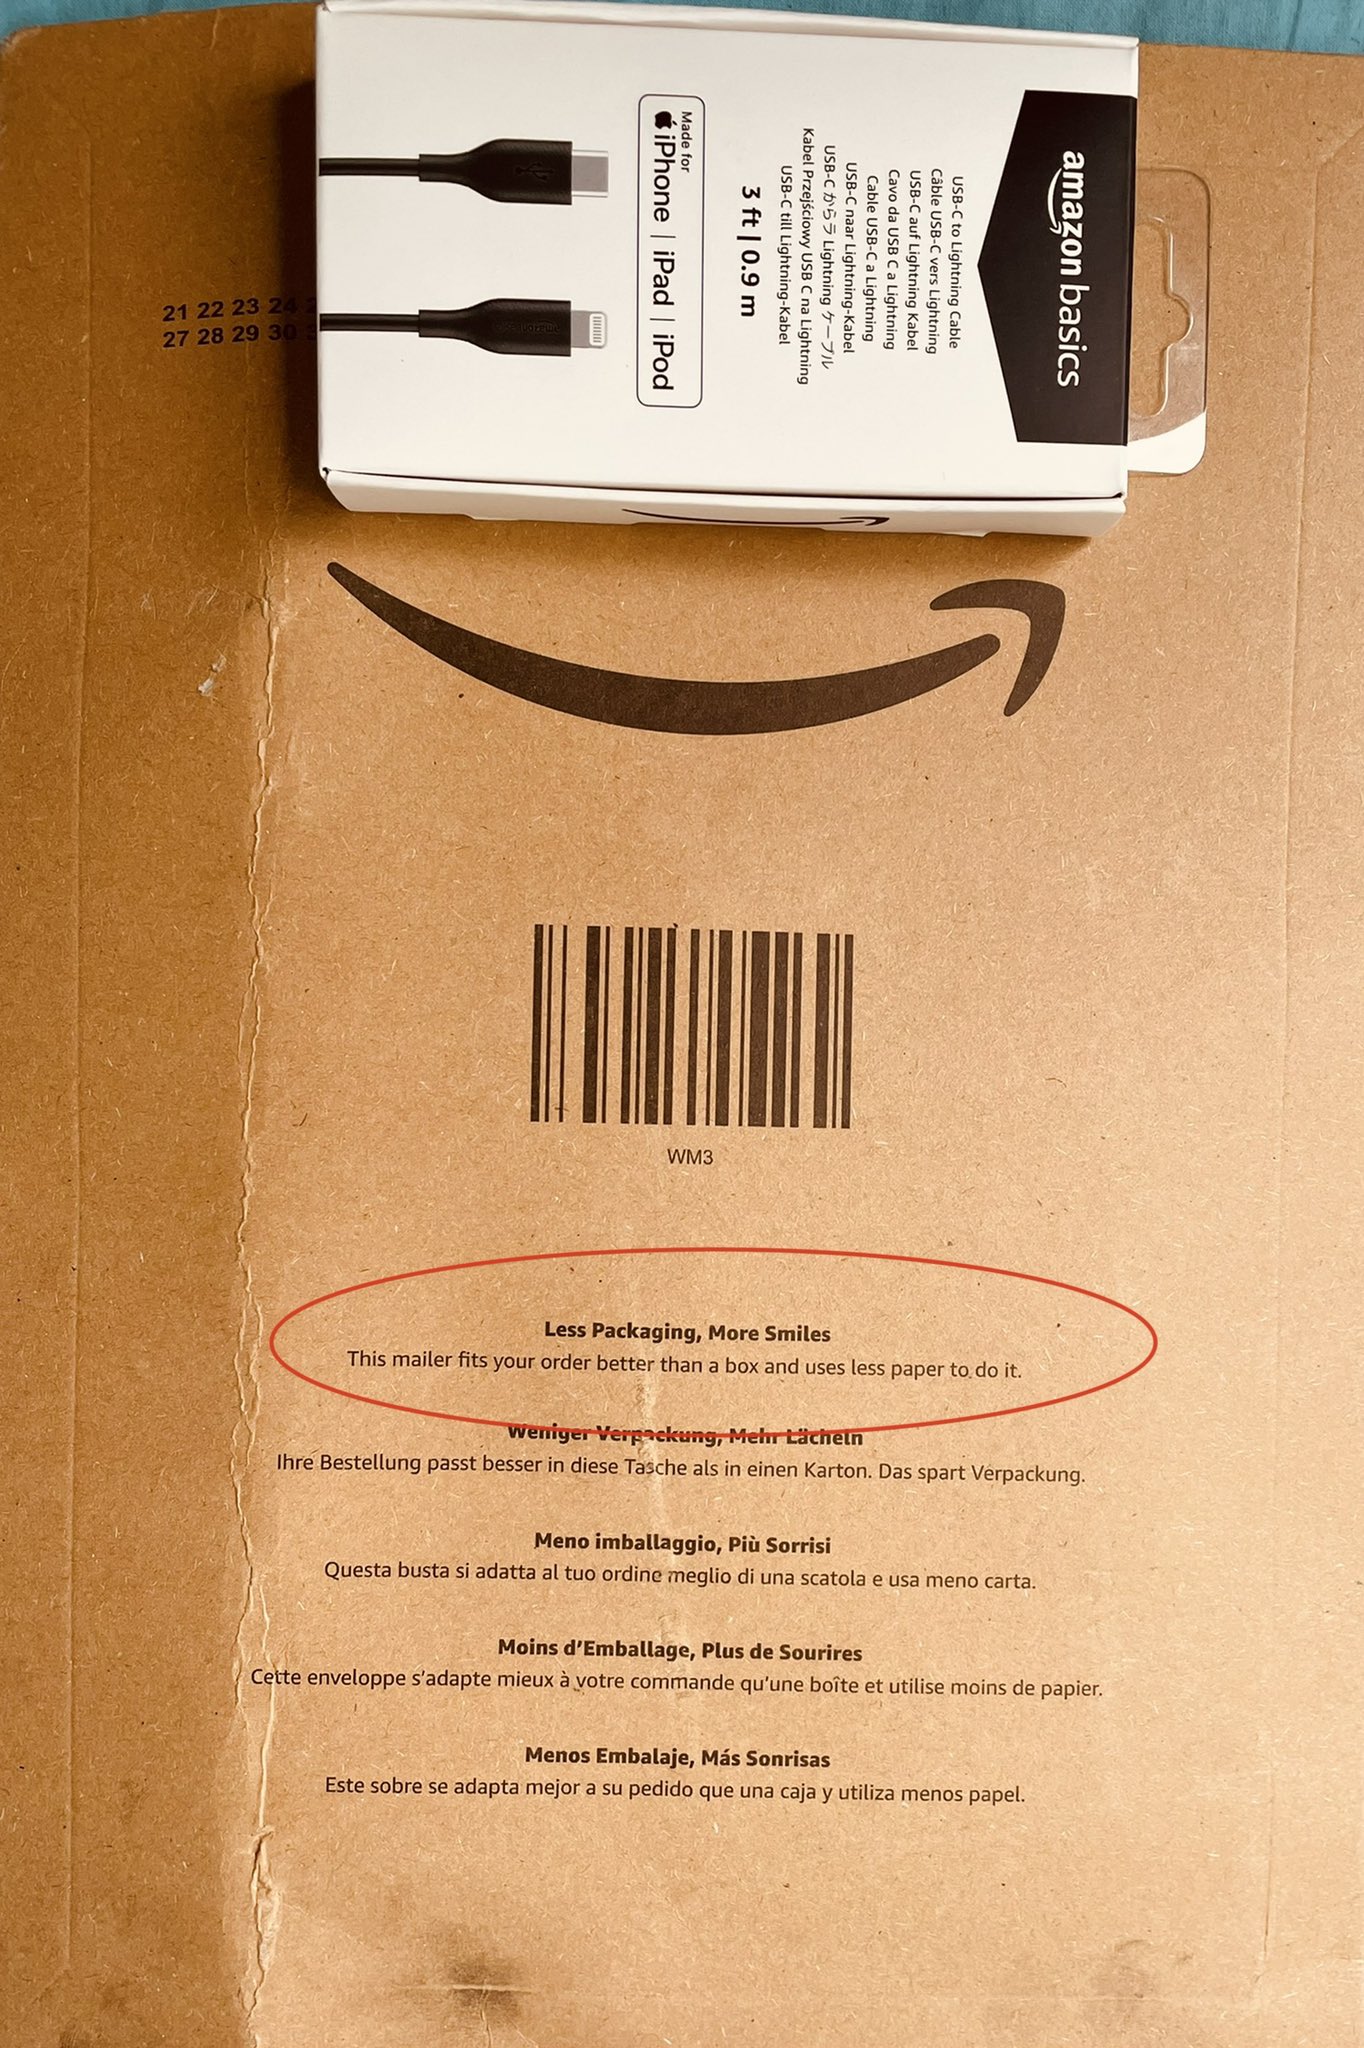 Devendra Vyas on Twitter: "The ratio of item to package doesn't scream  “Less Packaging” to me… but you go @amazon https://t.co/QwJOh6hGlv" /  Twitter